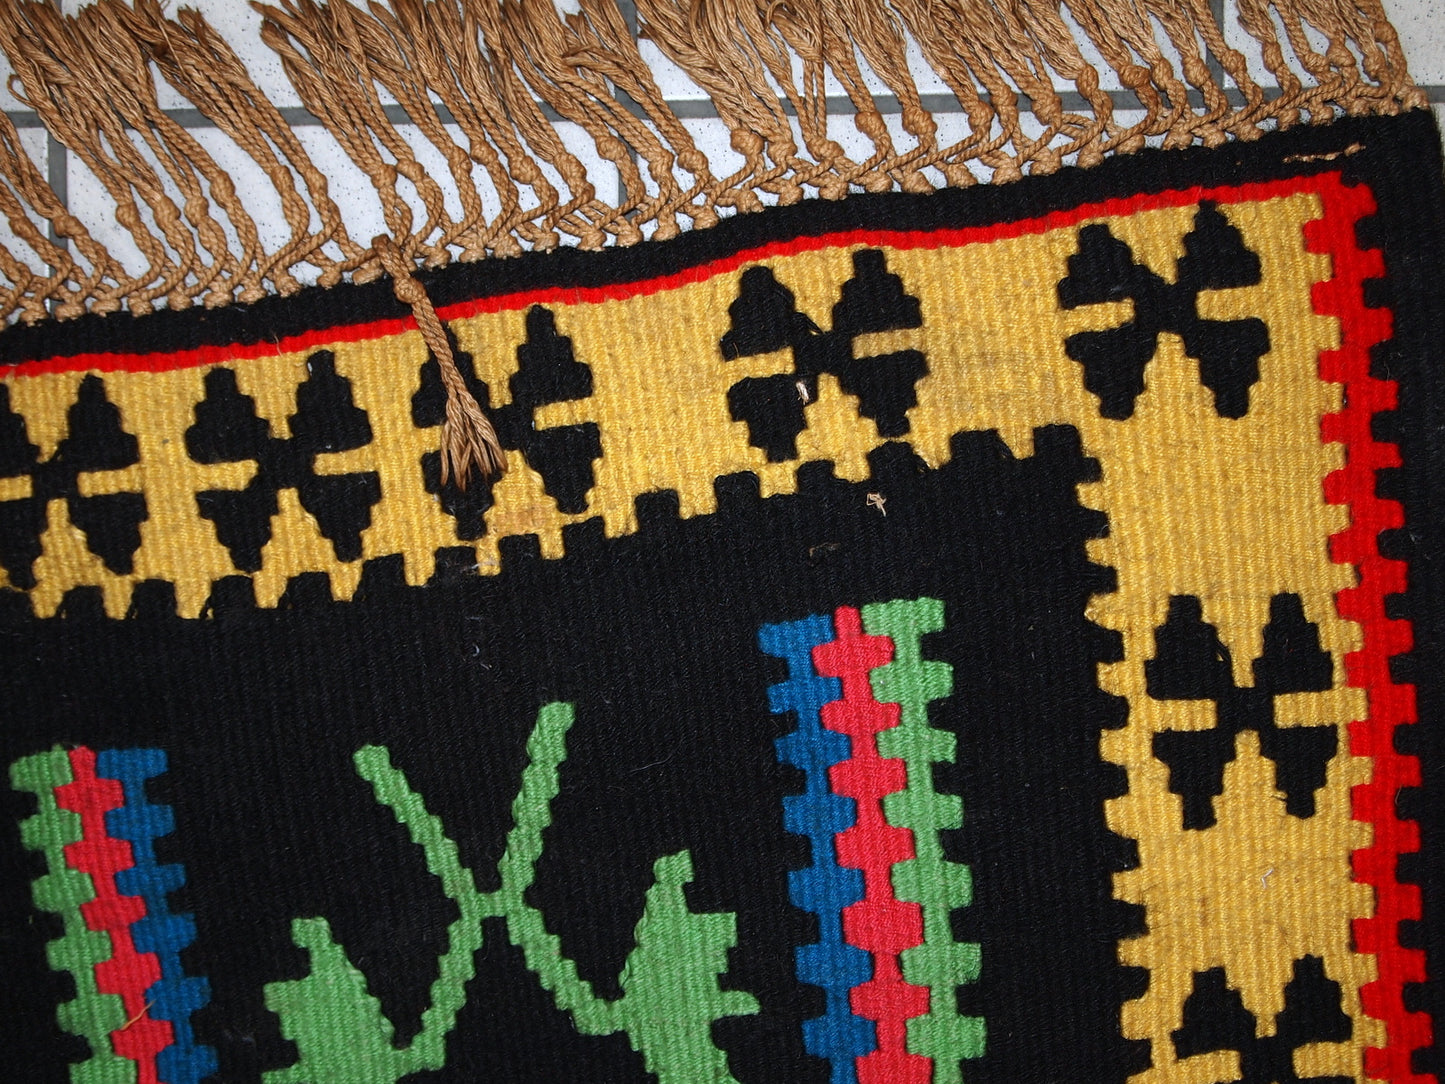 Handmade vintage prayer Turkish Anatolian flat-weave made in black, yellow, green and blue colors. The rug is in original good condition, it is not even ( a little crooked) due to be handwoven.